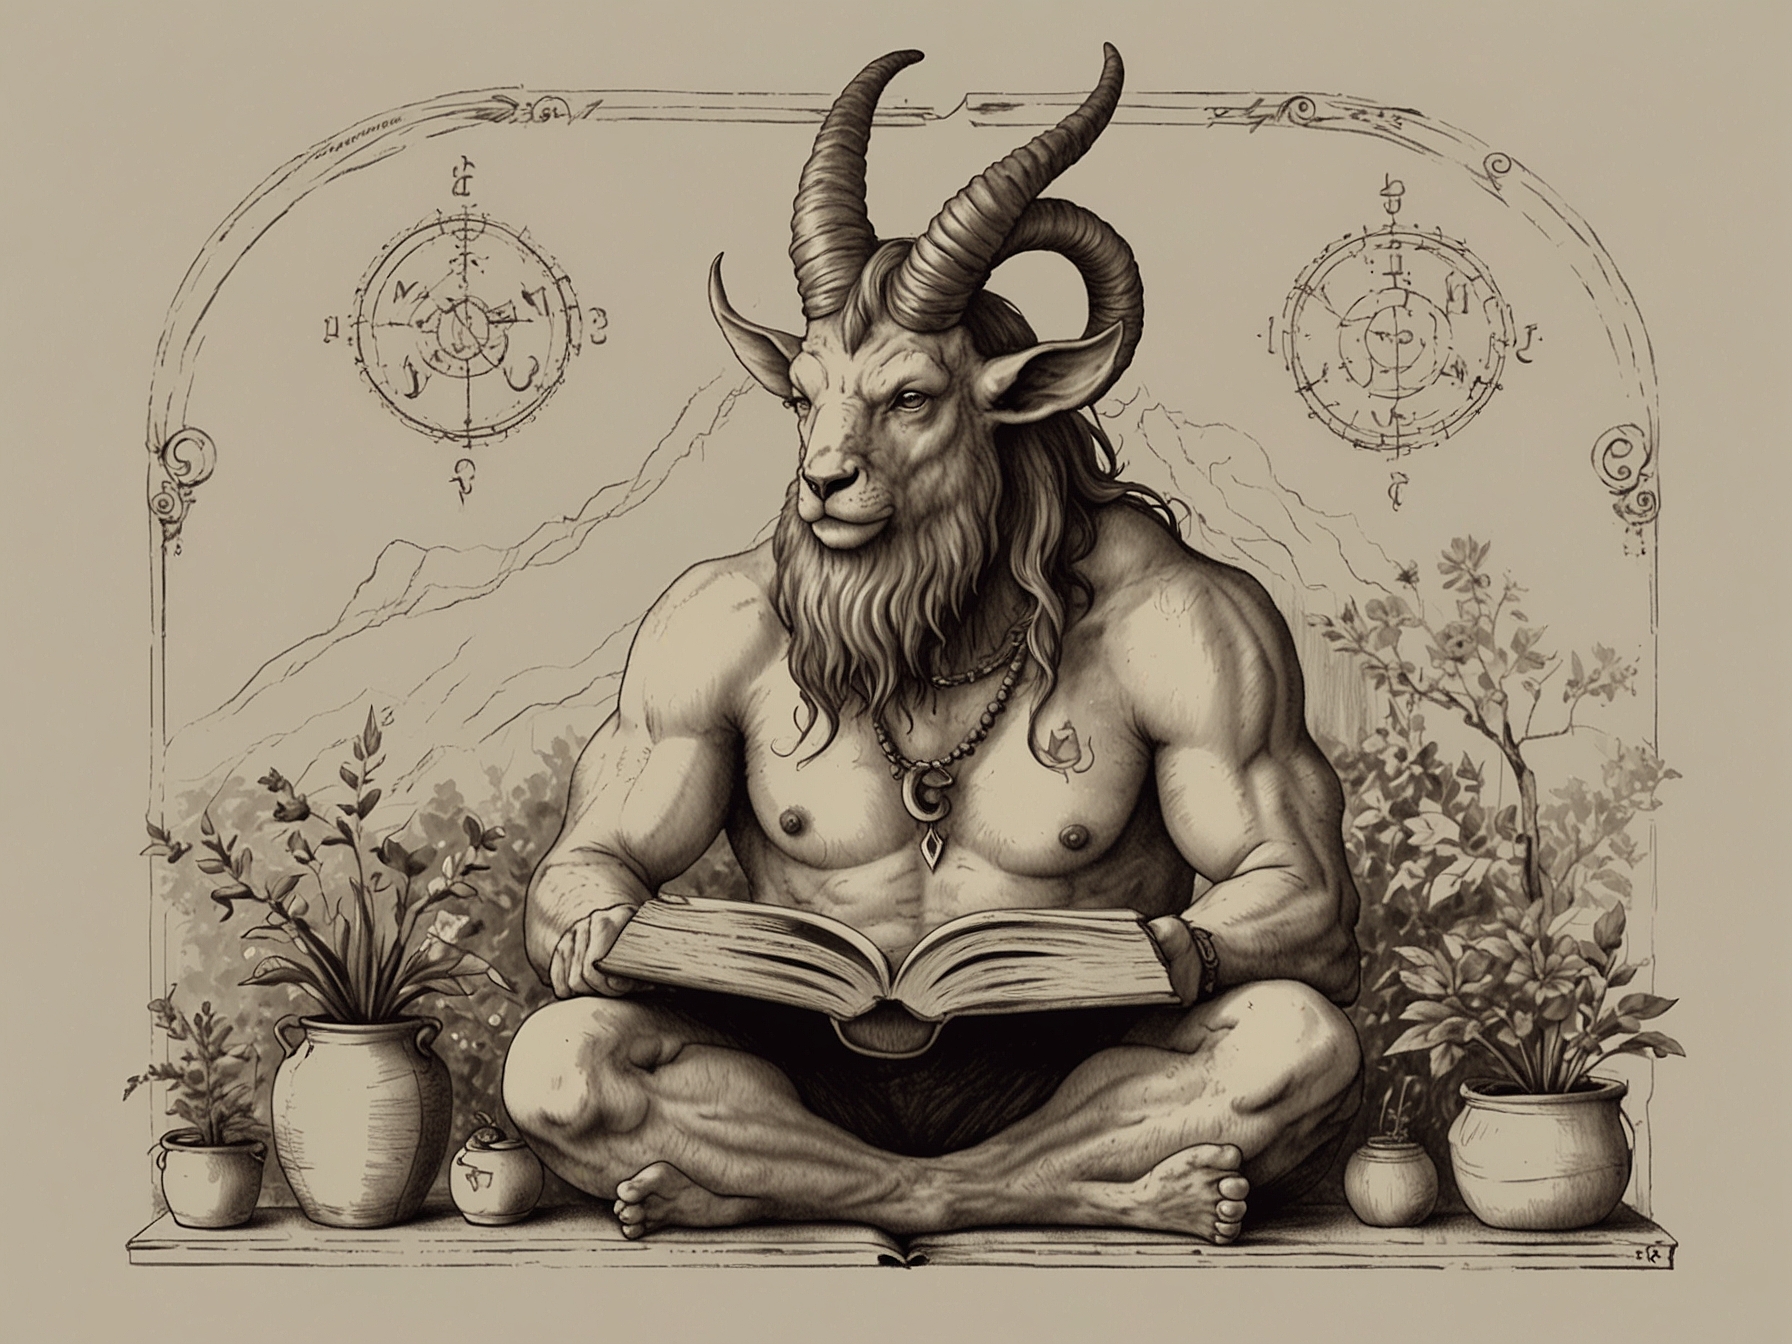 A Capricorn engaged in self-improvement activities like reading and learning new skills, with symbols of knowledge and growth surrounding them.